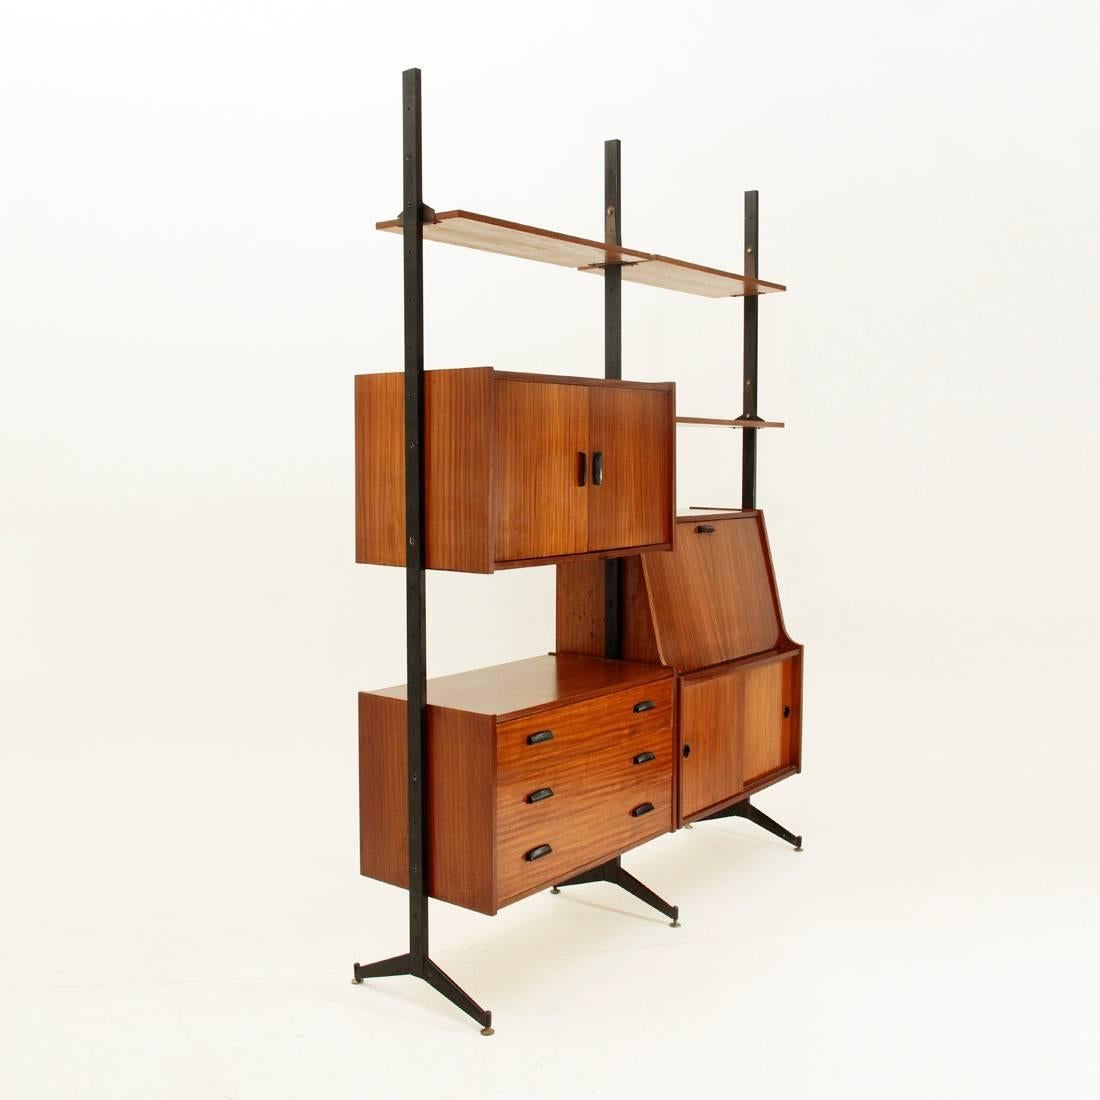 Italian wall unit of the 1960s.
Black varnished metal uprights with adjustable brass feet.
Three shelves and three container modules, black painted metal handles.
Signs of rust, some stains and veneer flaws on the wooden part.